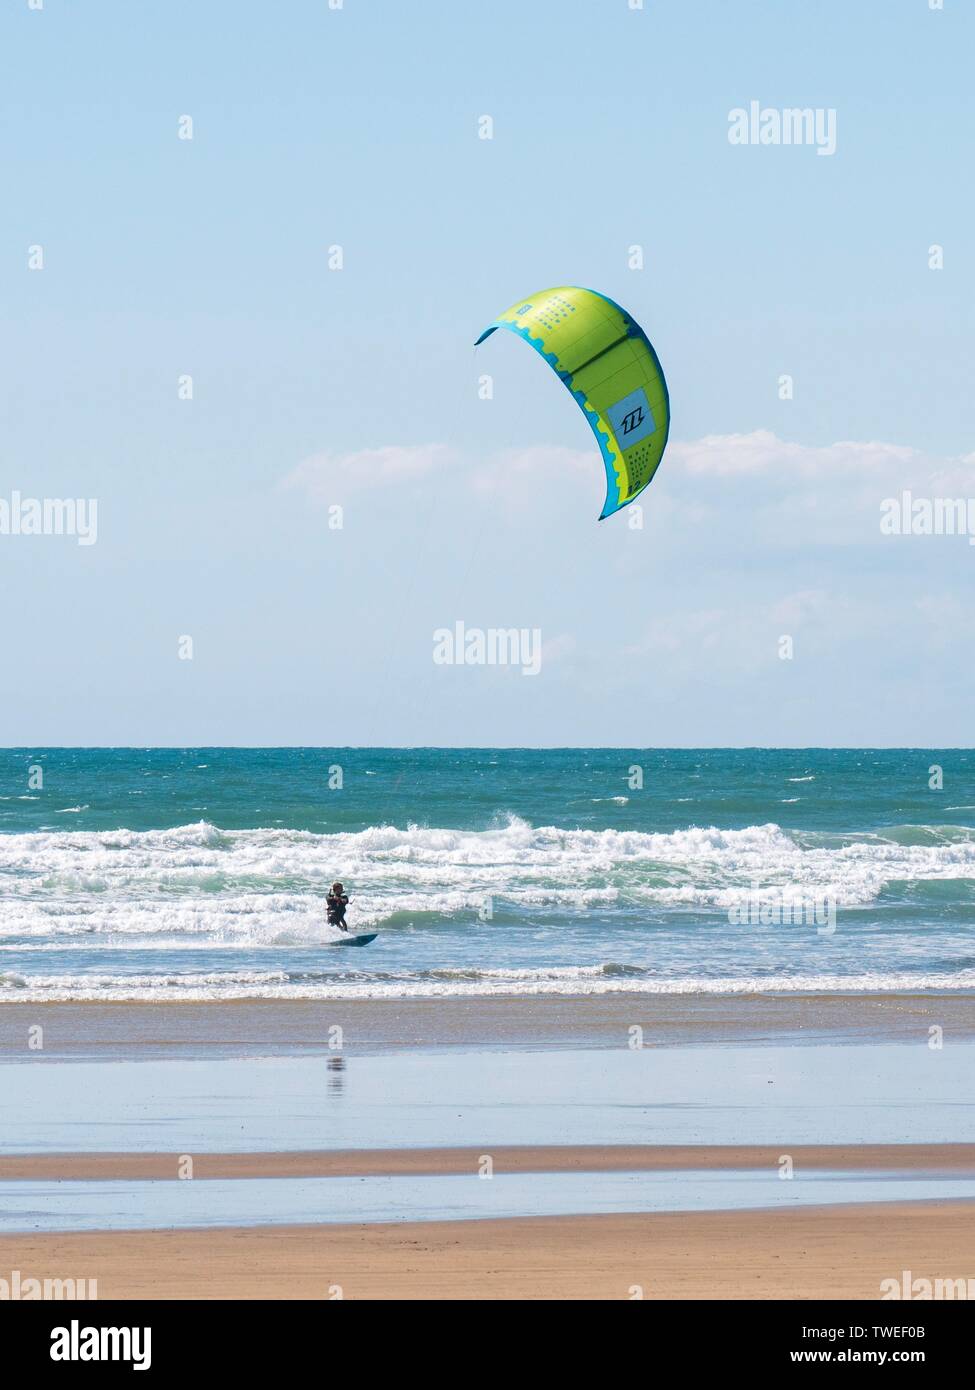 A kiteboarder on the sea at a shallow beach in Devon, UK Stock Photo